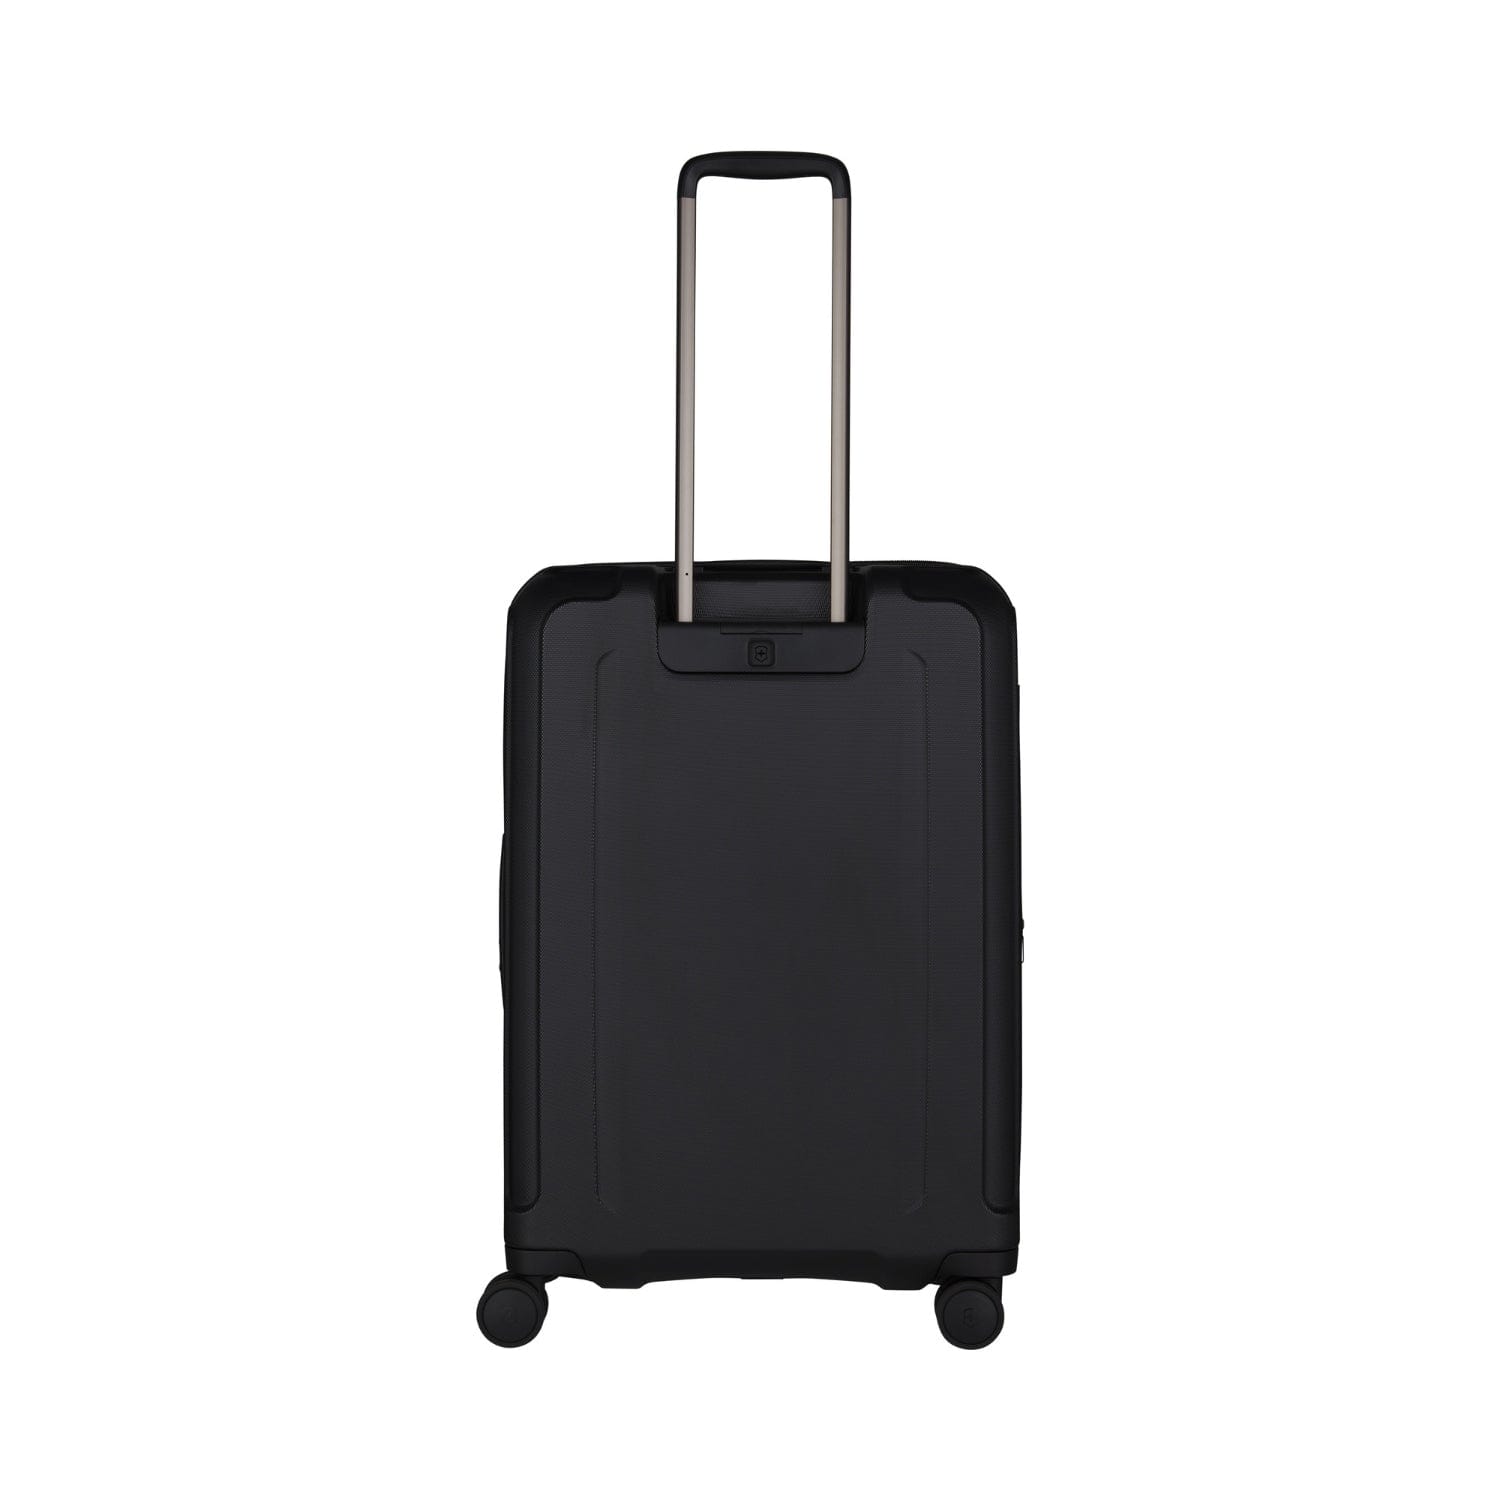 Victorinox Werks Traveler 6.0 69cm Hardcase Expandable 4 Double Wheel Lightweight Check-In Luggage Trolley Black - 609970